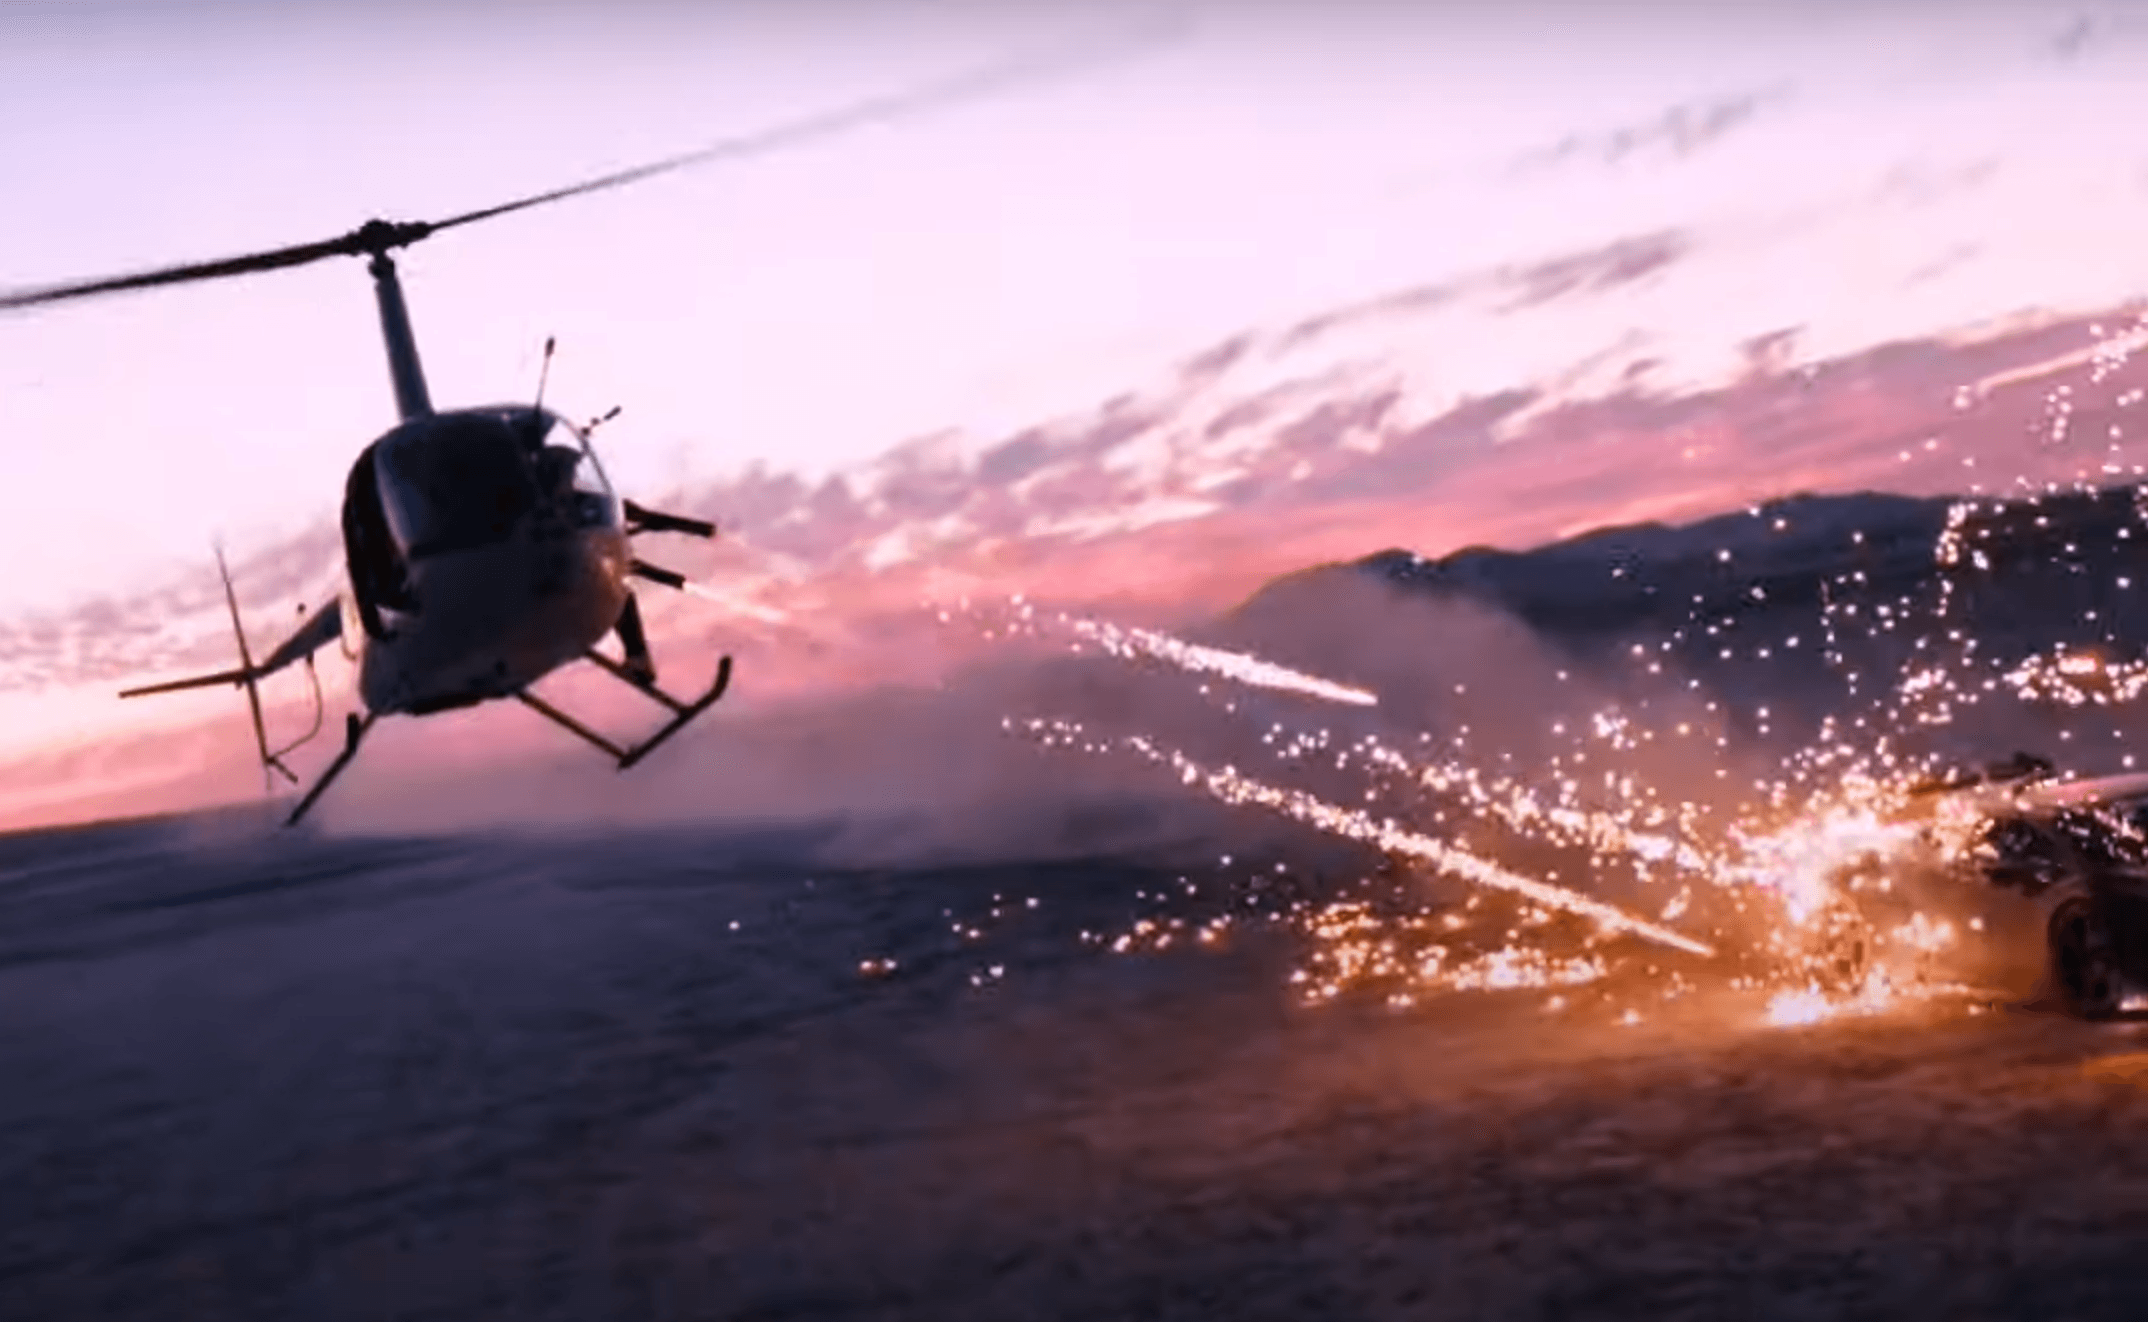 Helicopter and Fireworks Video Shoot Leads to Los Angeles Man’s Arrest